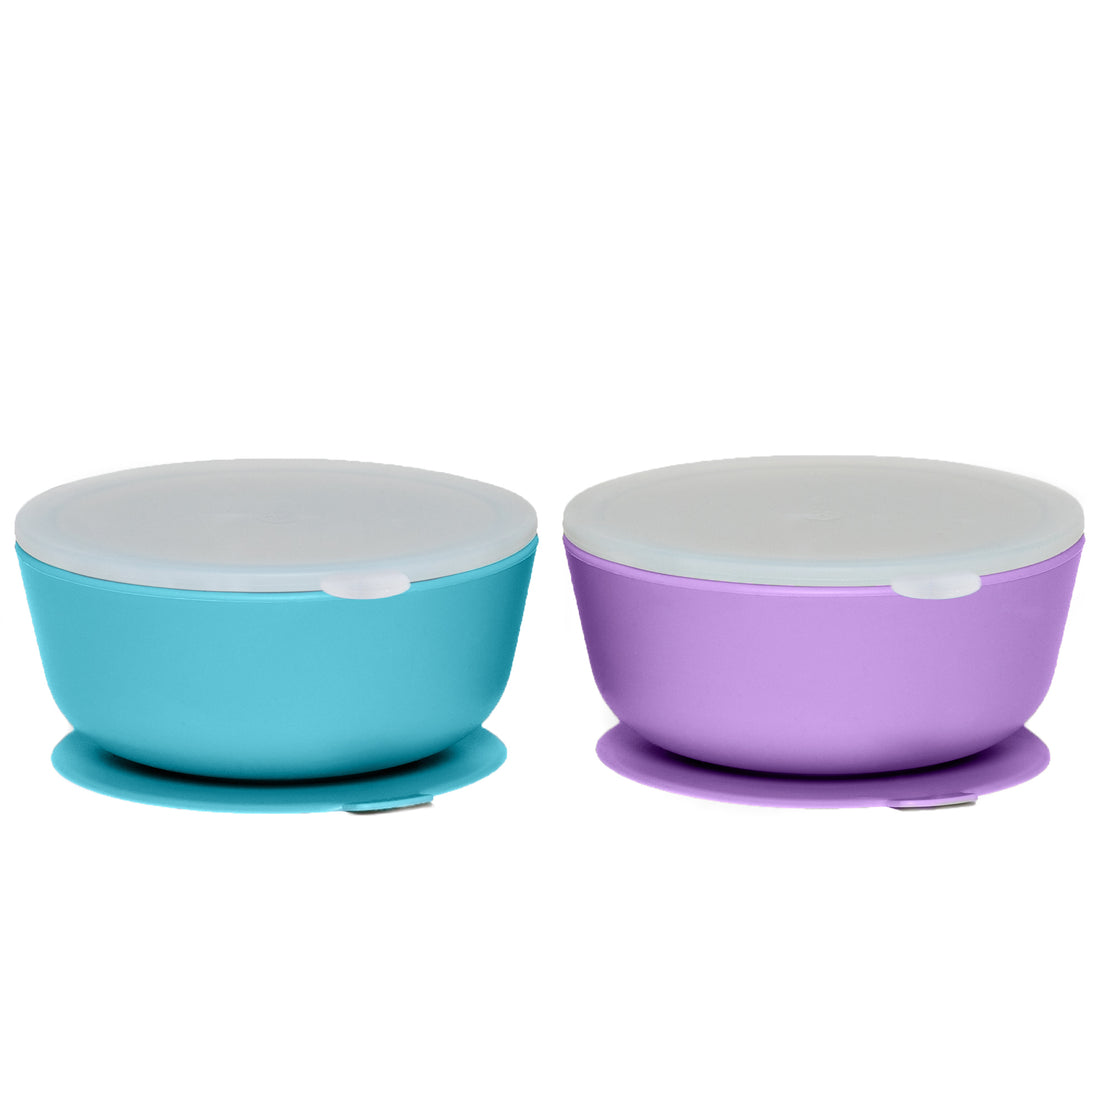 WeeSprout Suction Bowls for Baby (Set of 2) - 100% Silicone Toddler Bowl w/Plastic Lid - Leak Proof Feeding Supplies - Dishwashe